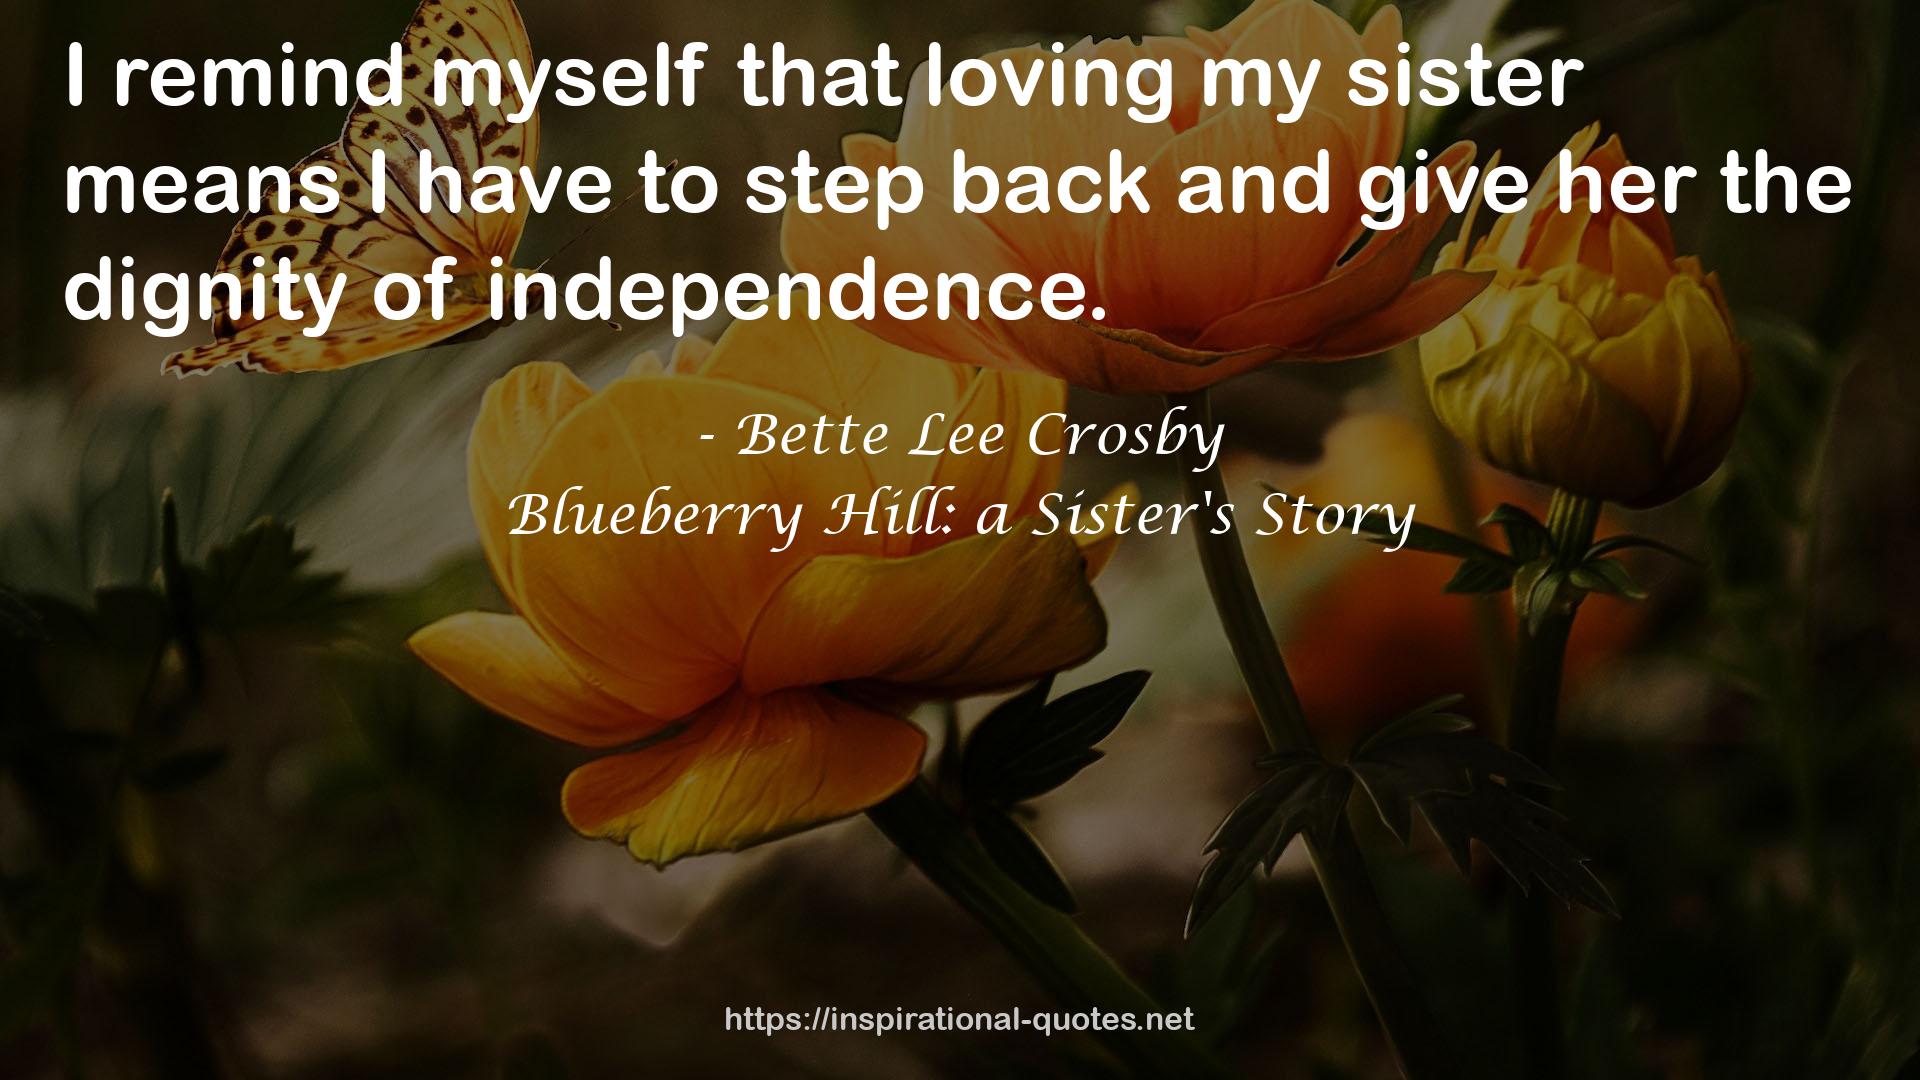 Bette Lee Crosby QUOTES